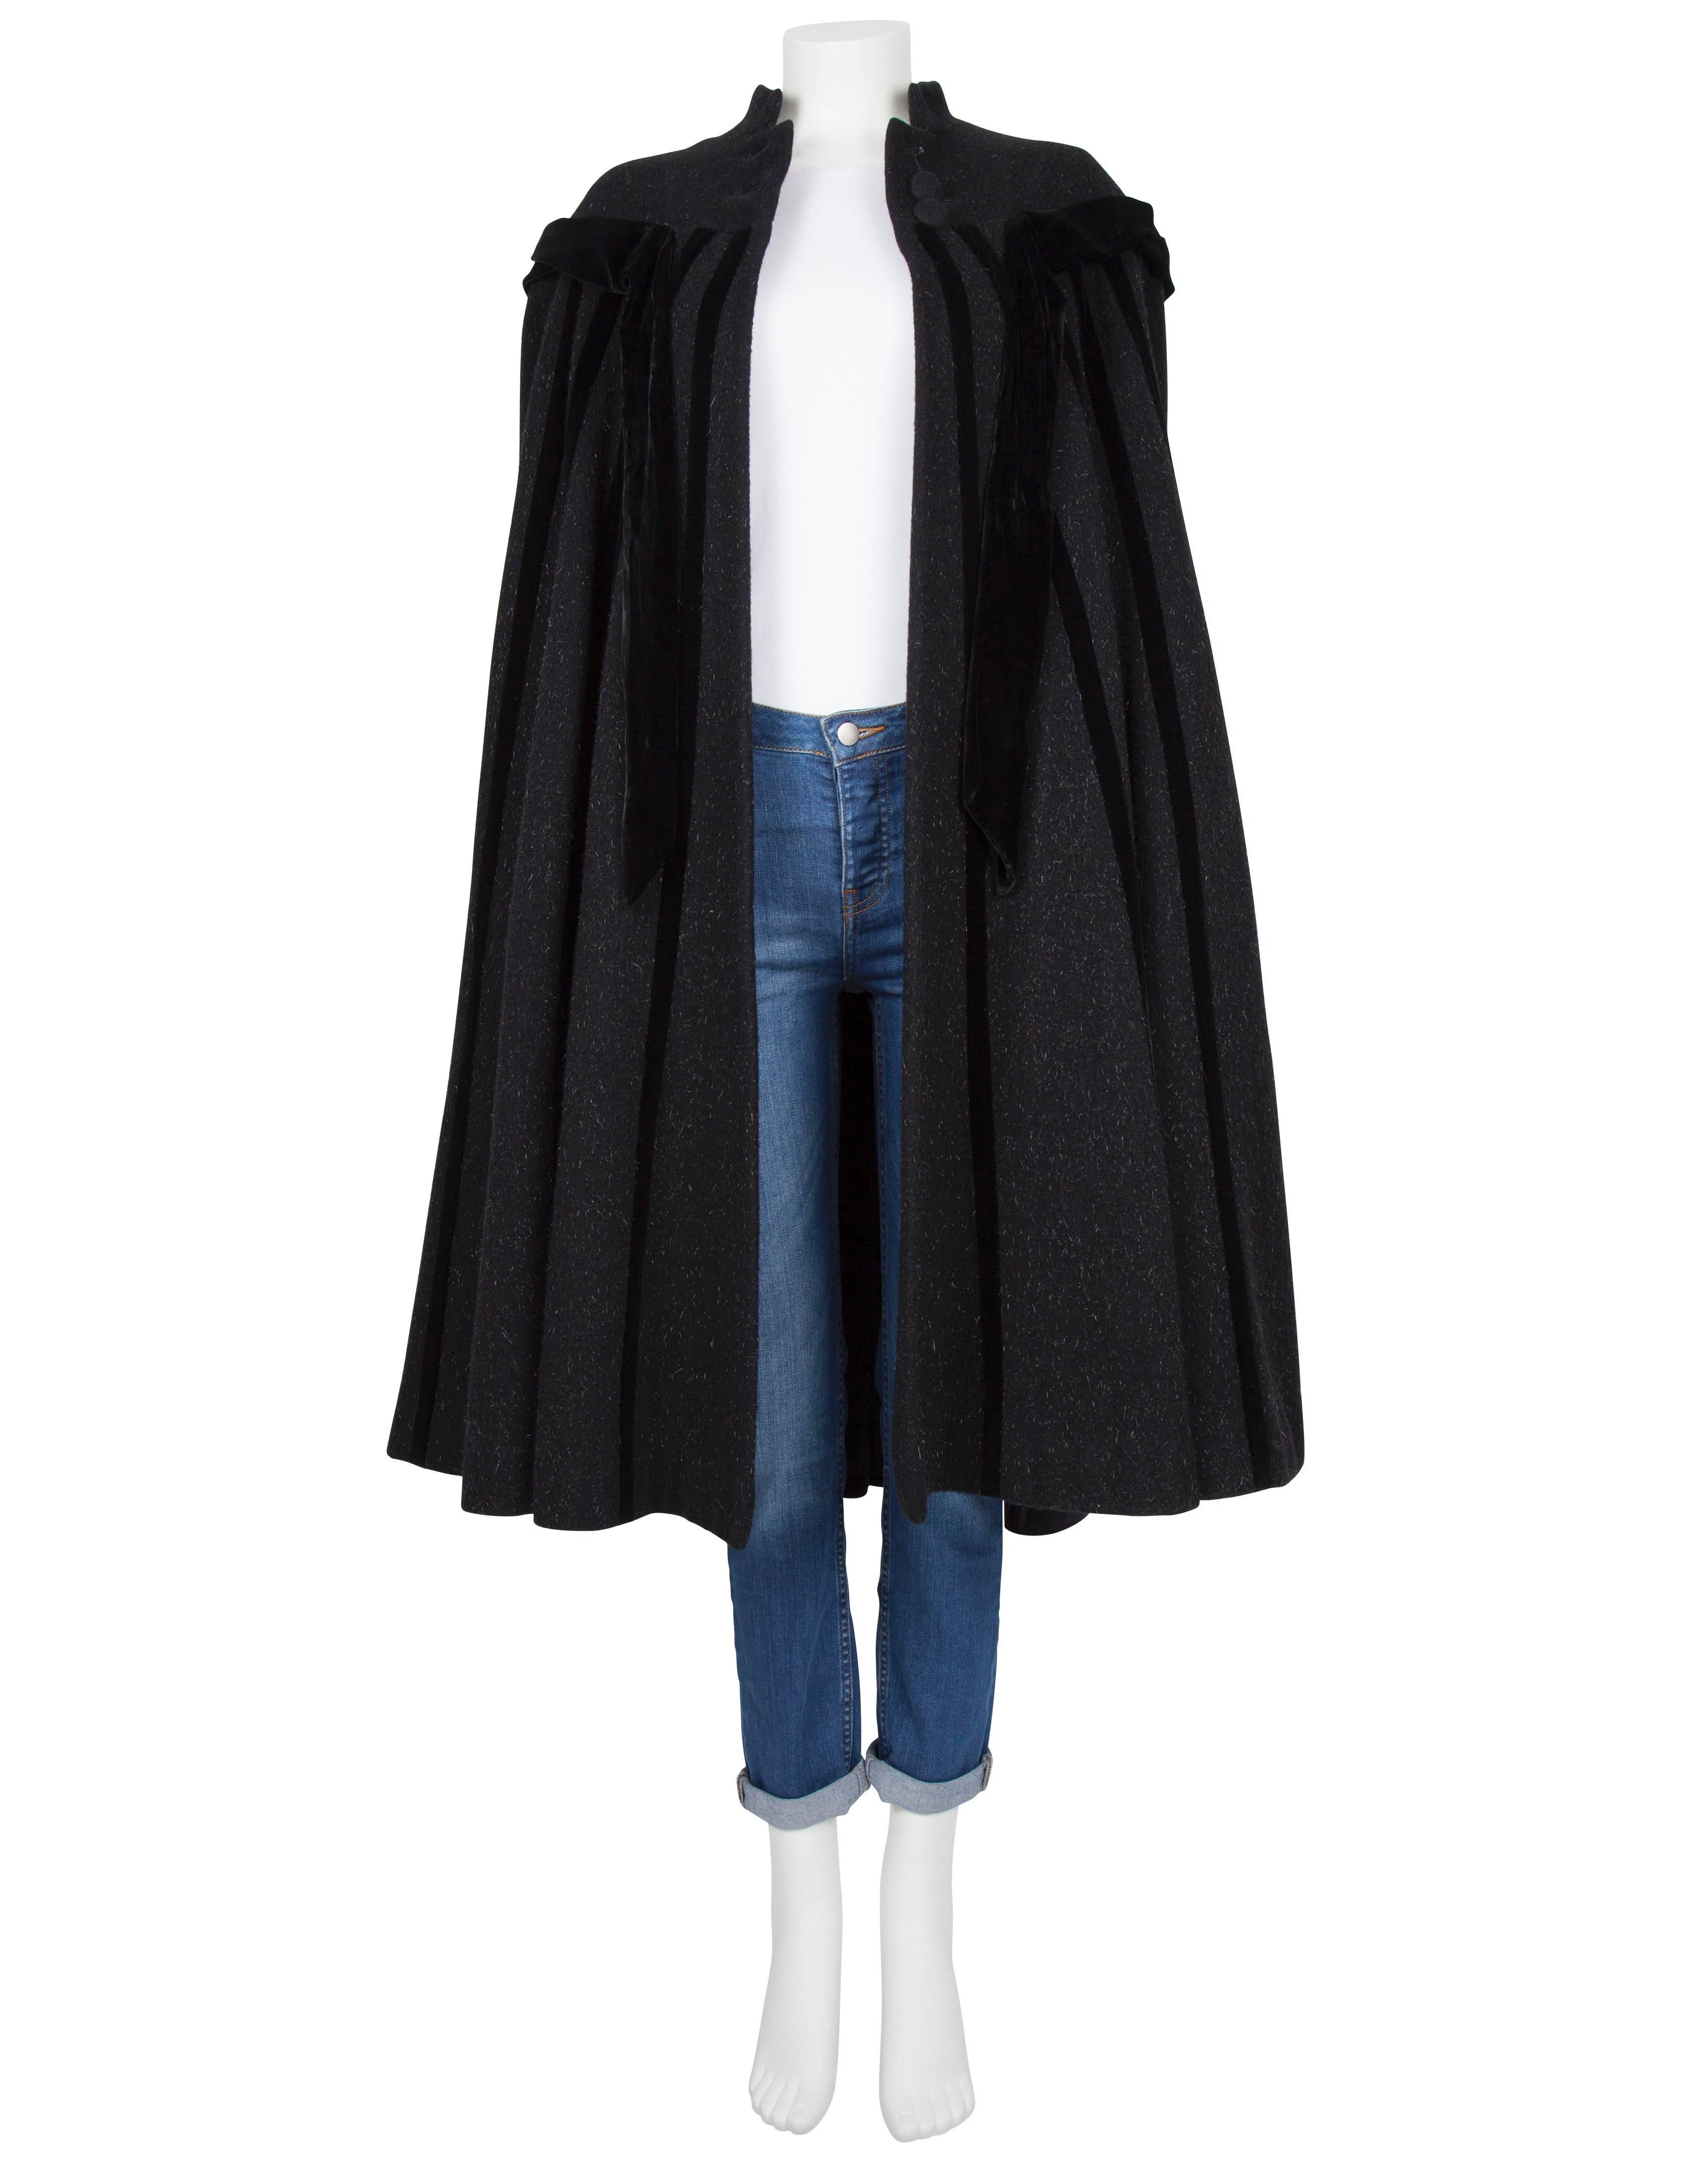 A late 1940's Lilli Ann charcoal wool coat with black velvet panelling throughout. The coat has a cape-like design with a velvet trimmed yoke from which black velvet inserts intersperse radially with the fabric forming the panels at the back. The